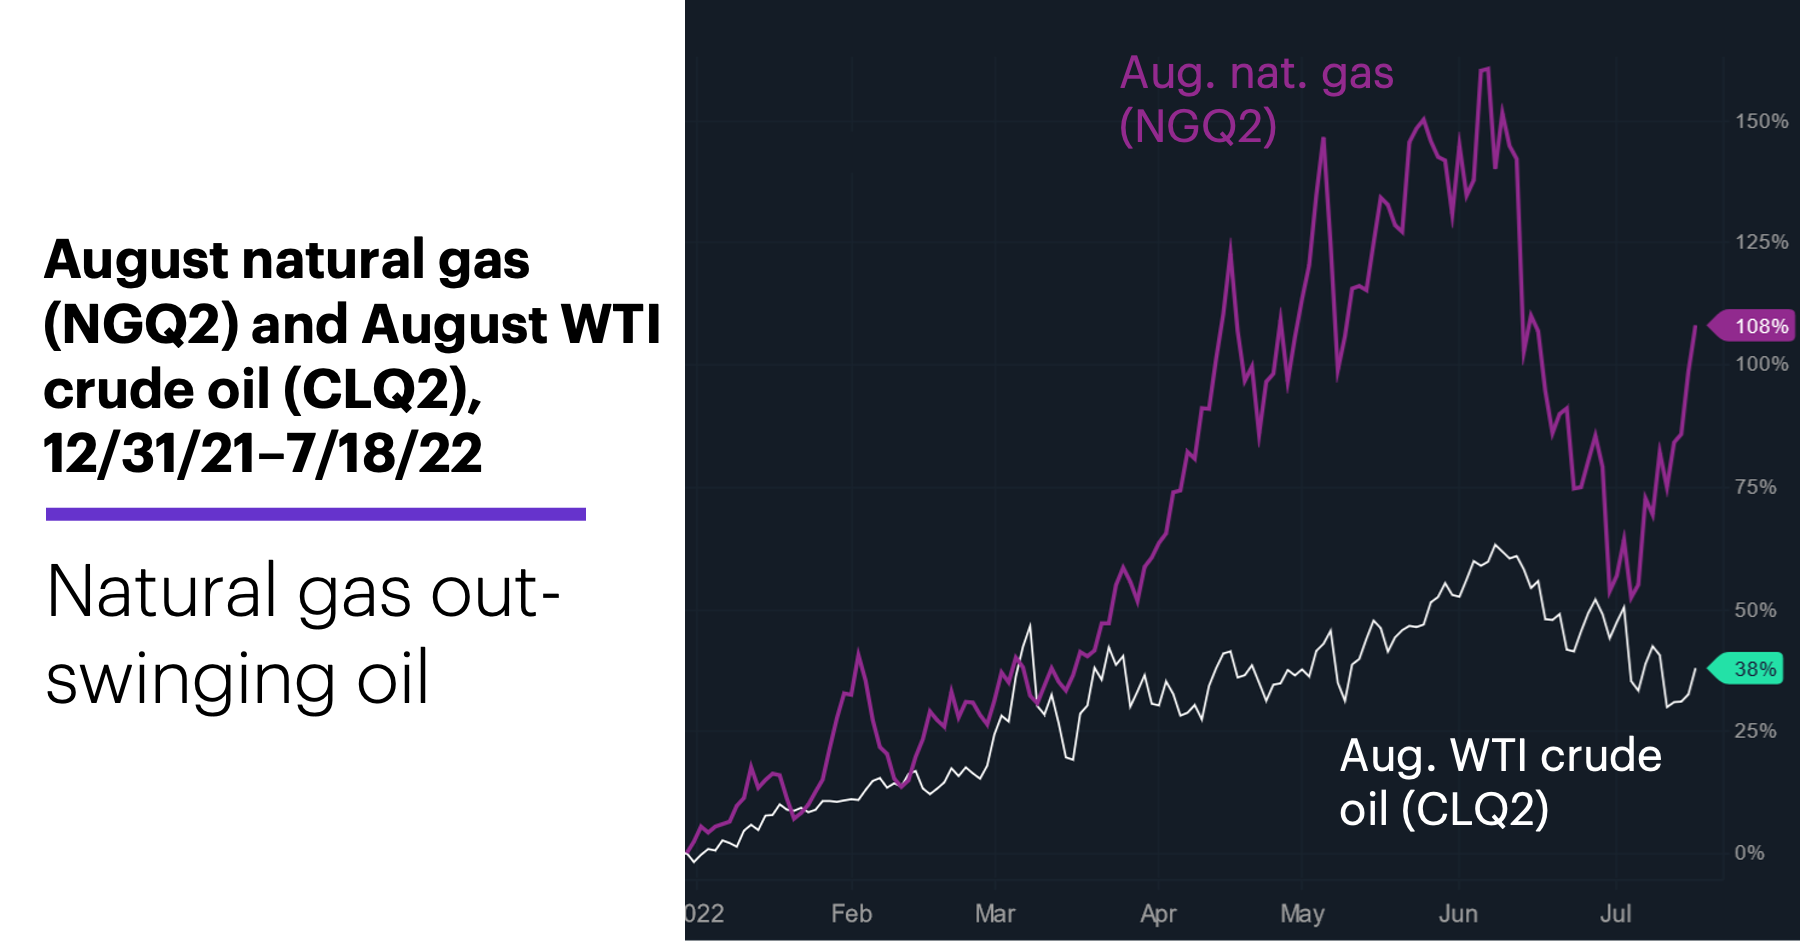 Chart 1: August natural gas (NGQ2) and August WTI crude oil (CLQ2), 12/31/22–7/18/22. Energy futures price chart. Natural gas out-swinging oil.